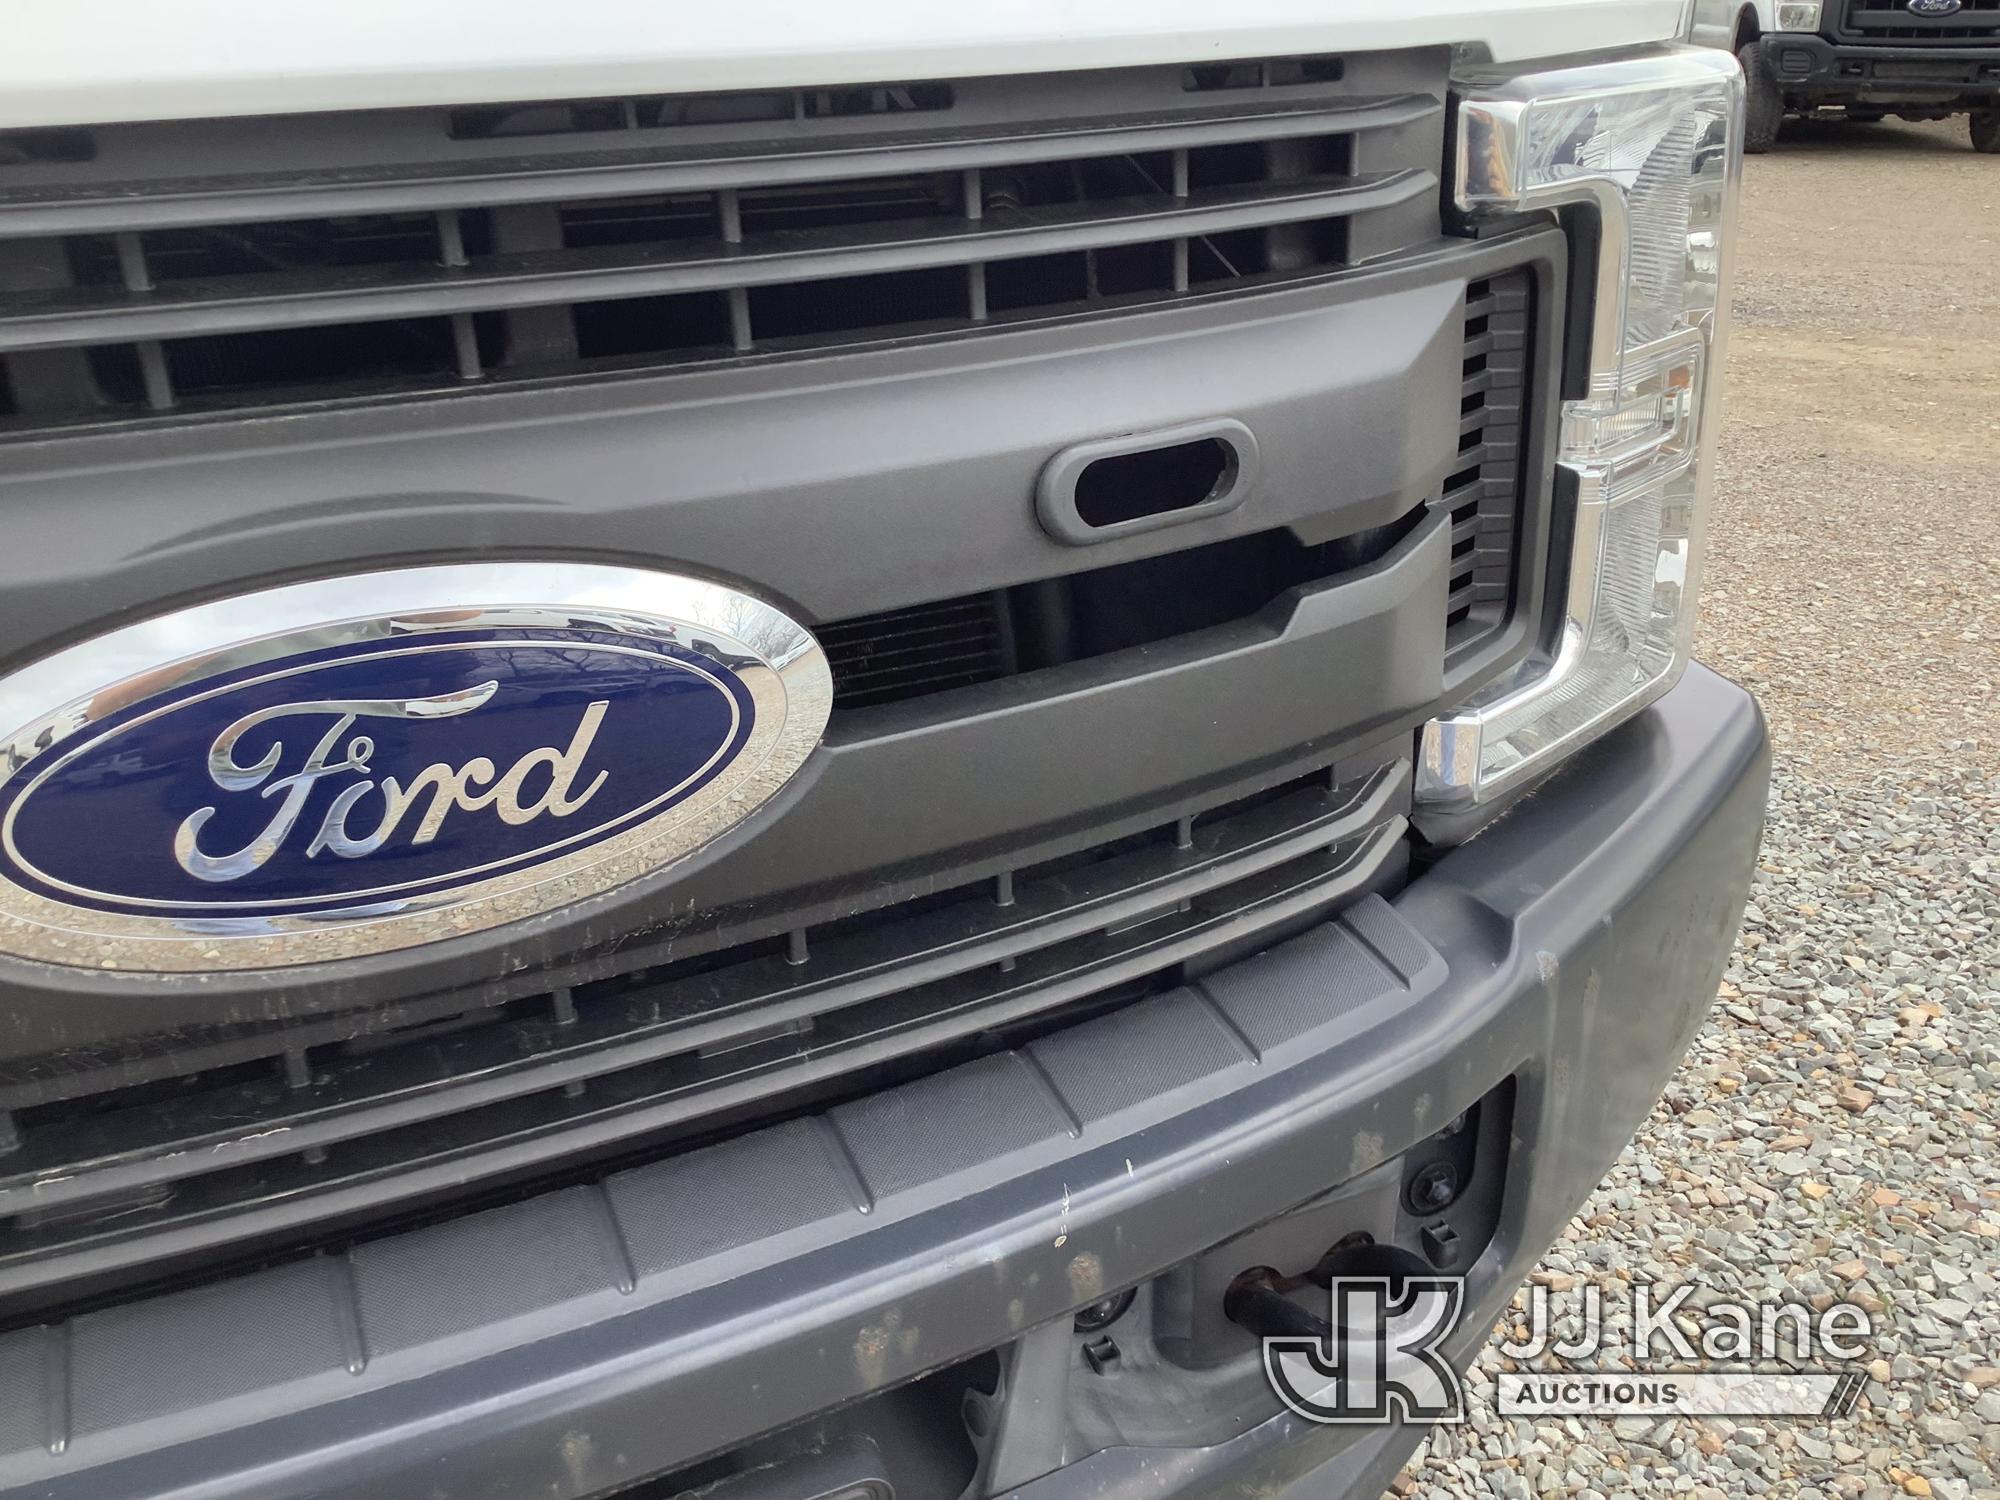 (Smock, PA) 2017 Ford F250 4x4 Enclosed Service Truck Runs & Moves, Rust Damage